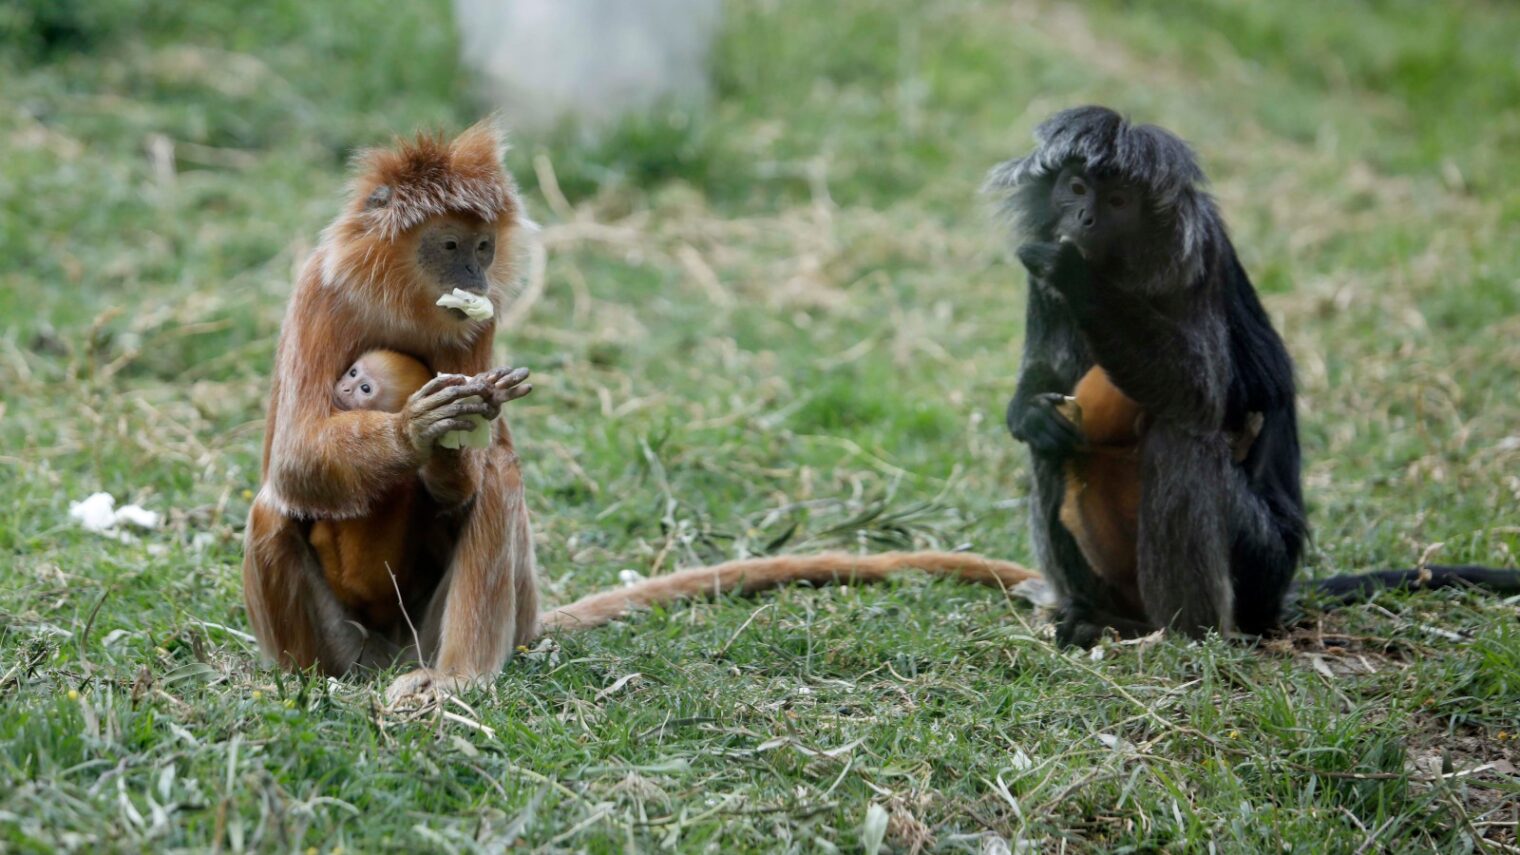 Monkeys looking like lions: Moscow Zoo has now its first rare